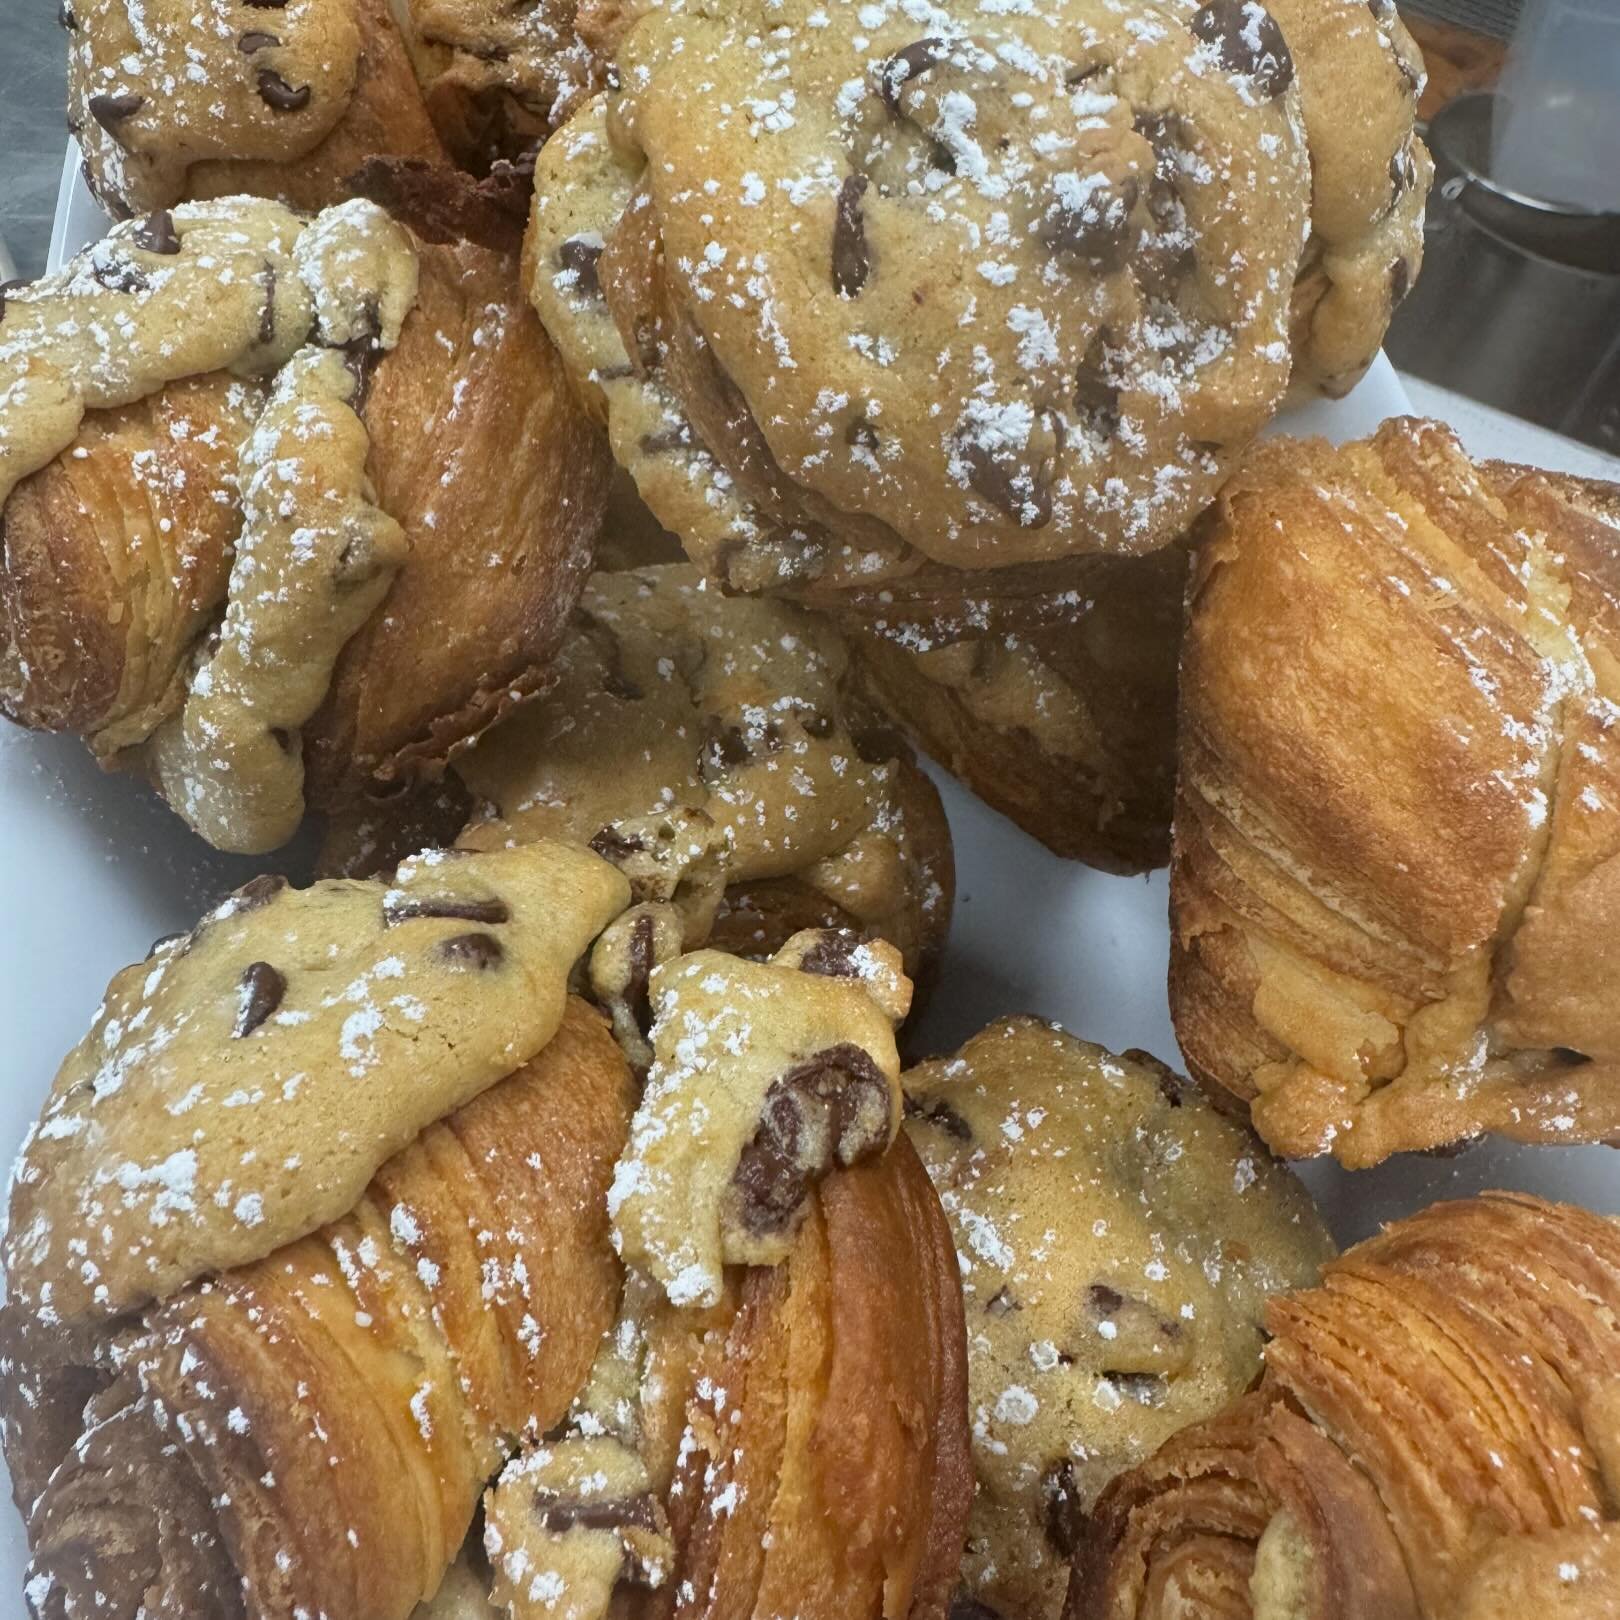 CROOKIES HAVE MADE IT TO B-Town! Chocolate chip cookie-stuffed croissant 😭😭😭👏🏼👏🏼👏🏼 Limited special today.